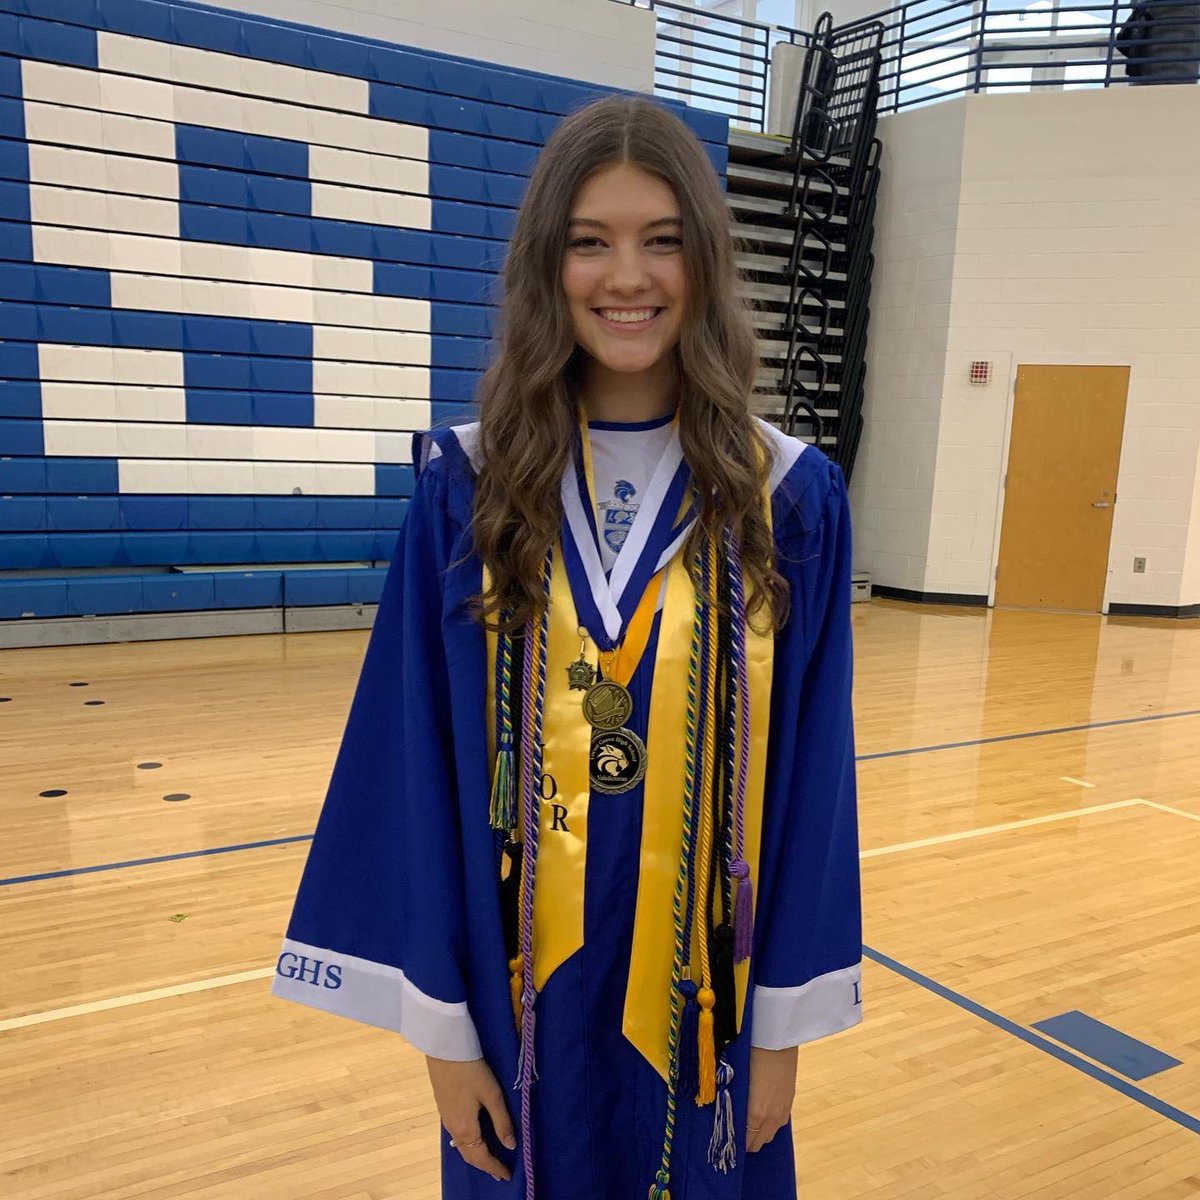 Congrats to the Valedictorian of LGHS: Britney Hammonds!! Super proud parent moment. Thankful and blessed! #lghshonors